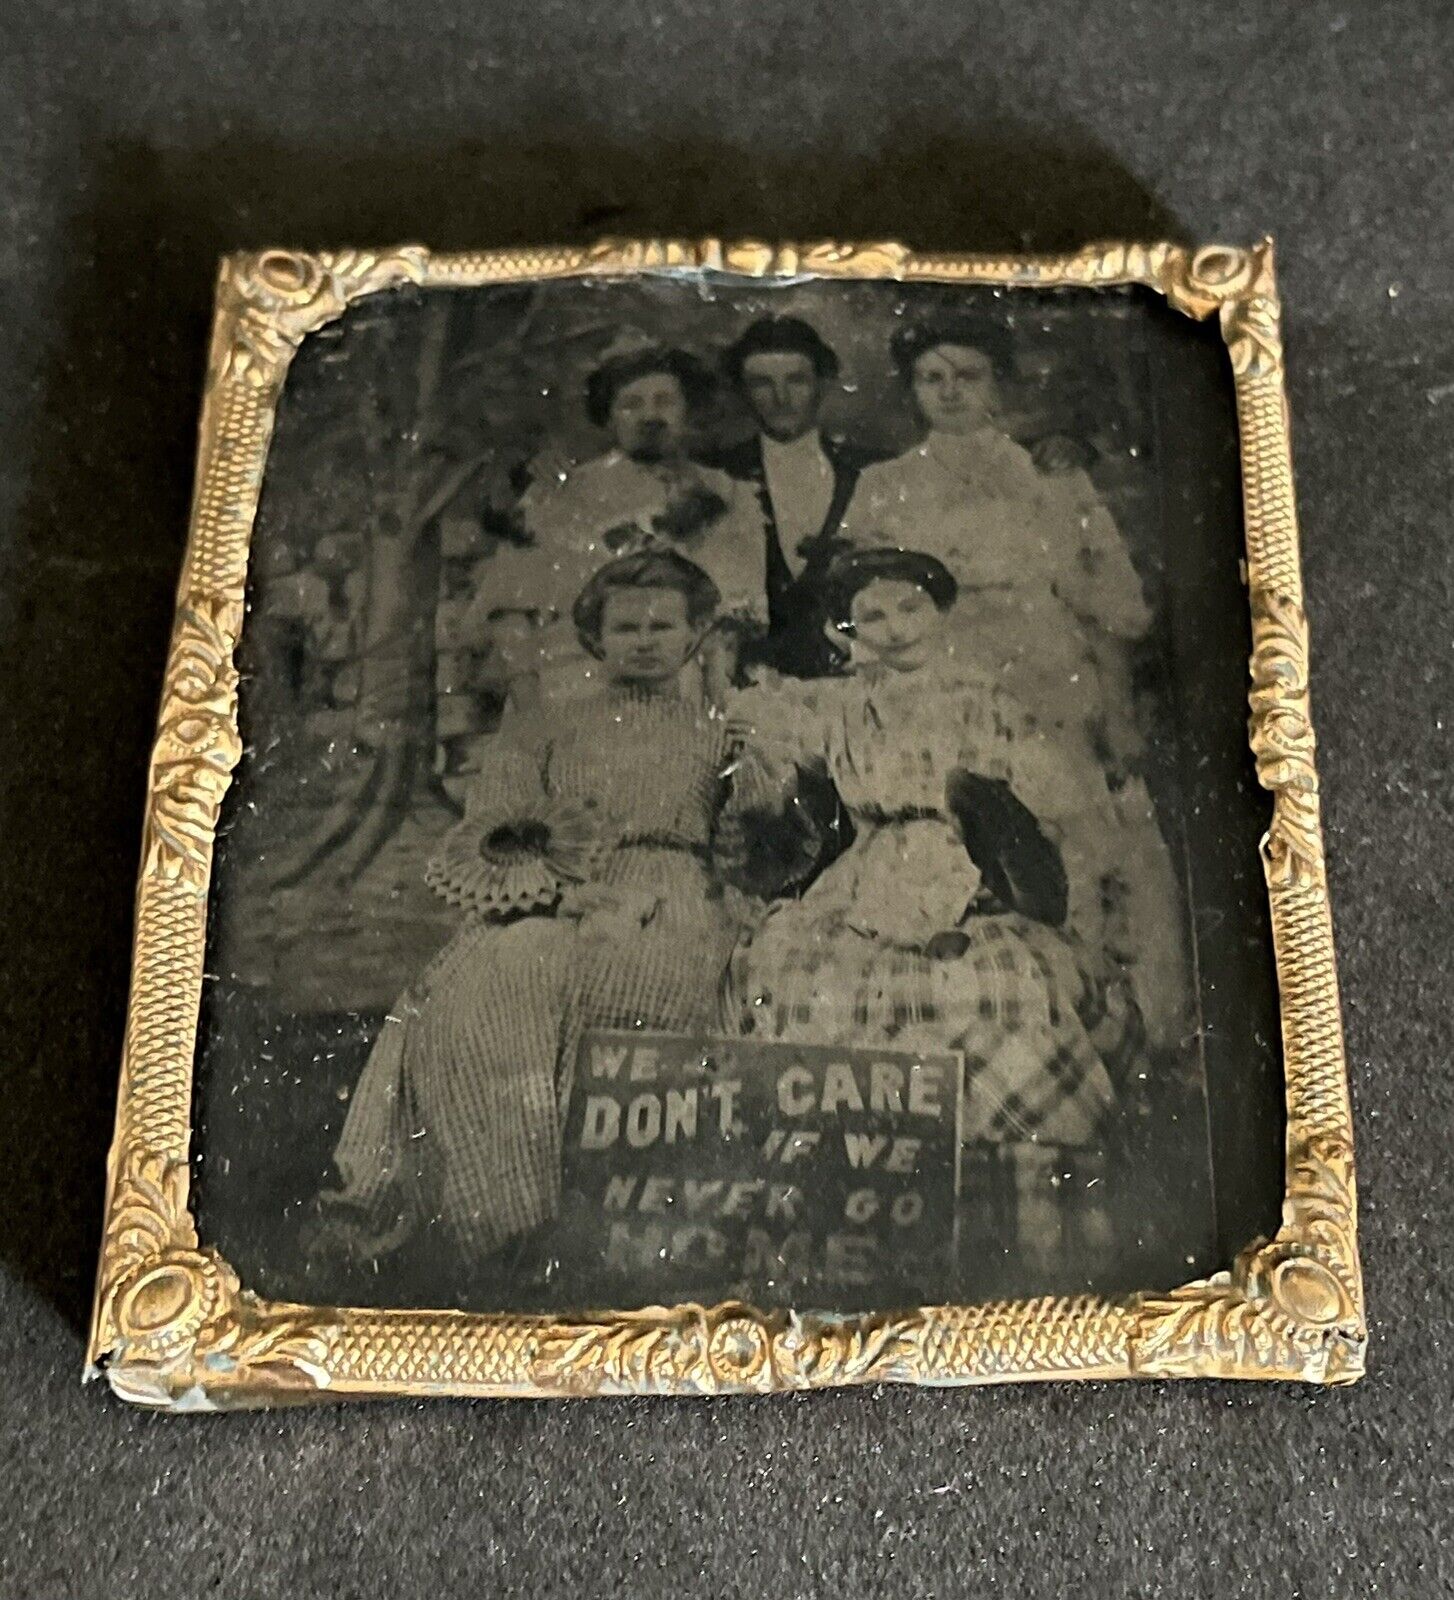 WE DON’T CARE … Original Tintype 19th C. - Unusual Group Photo